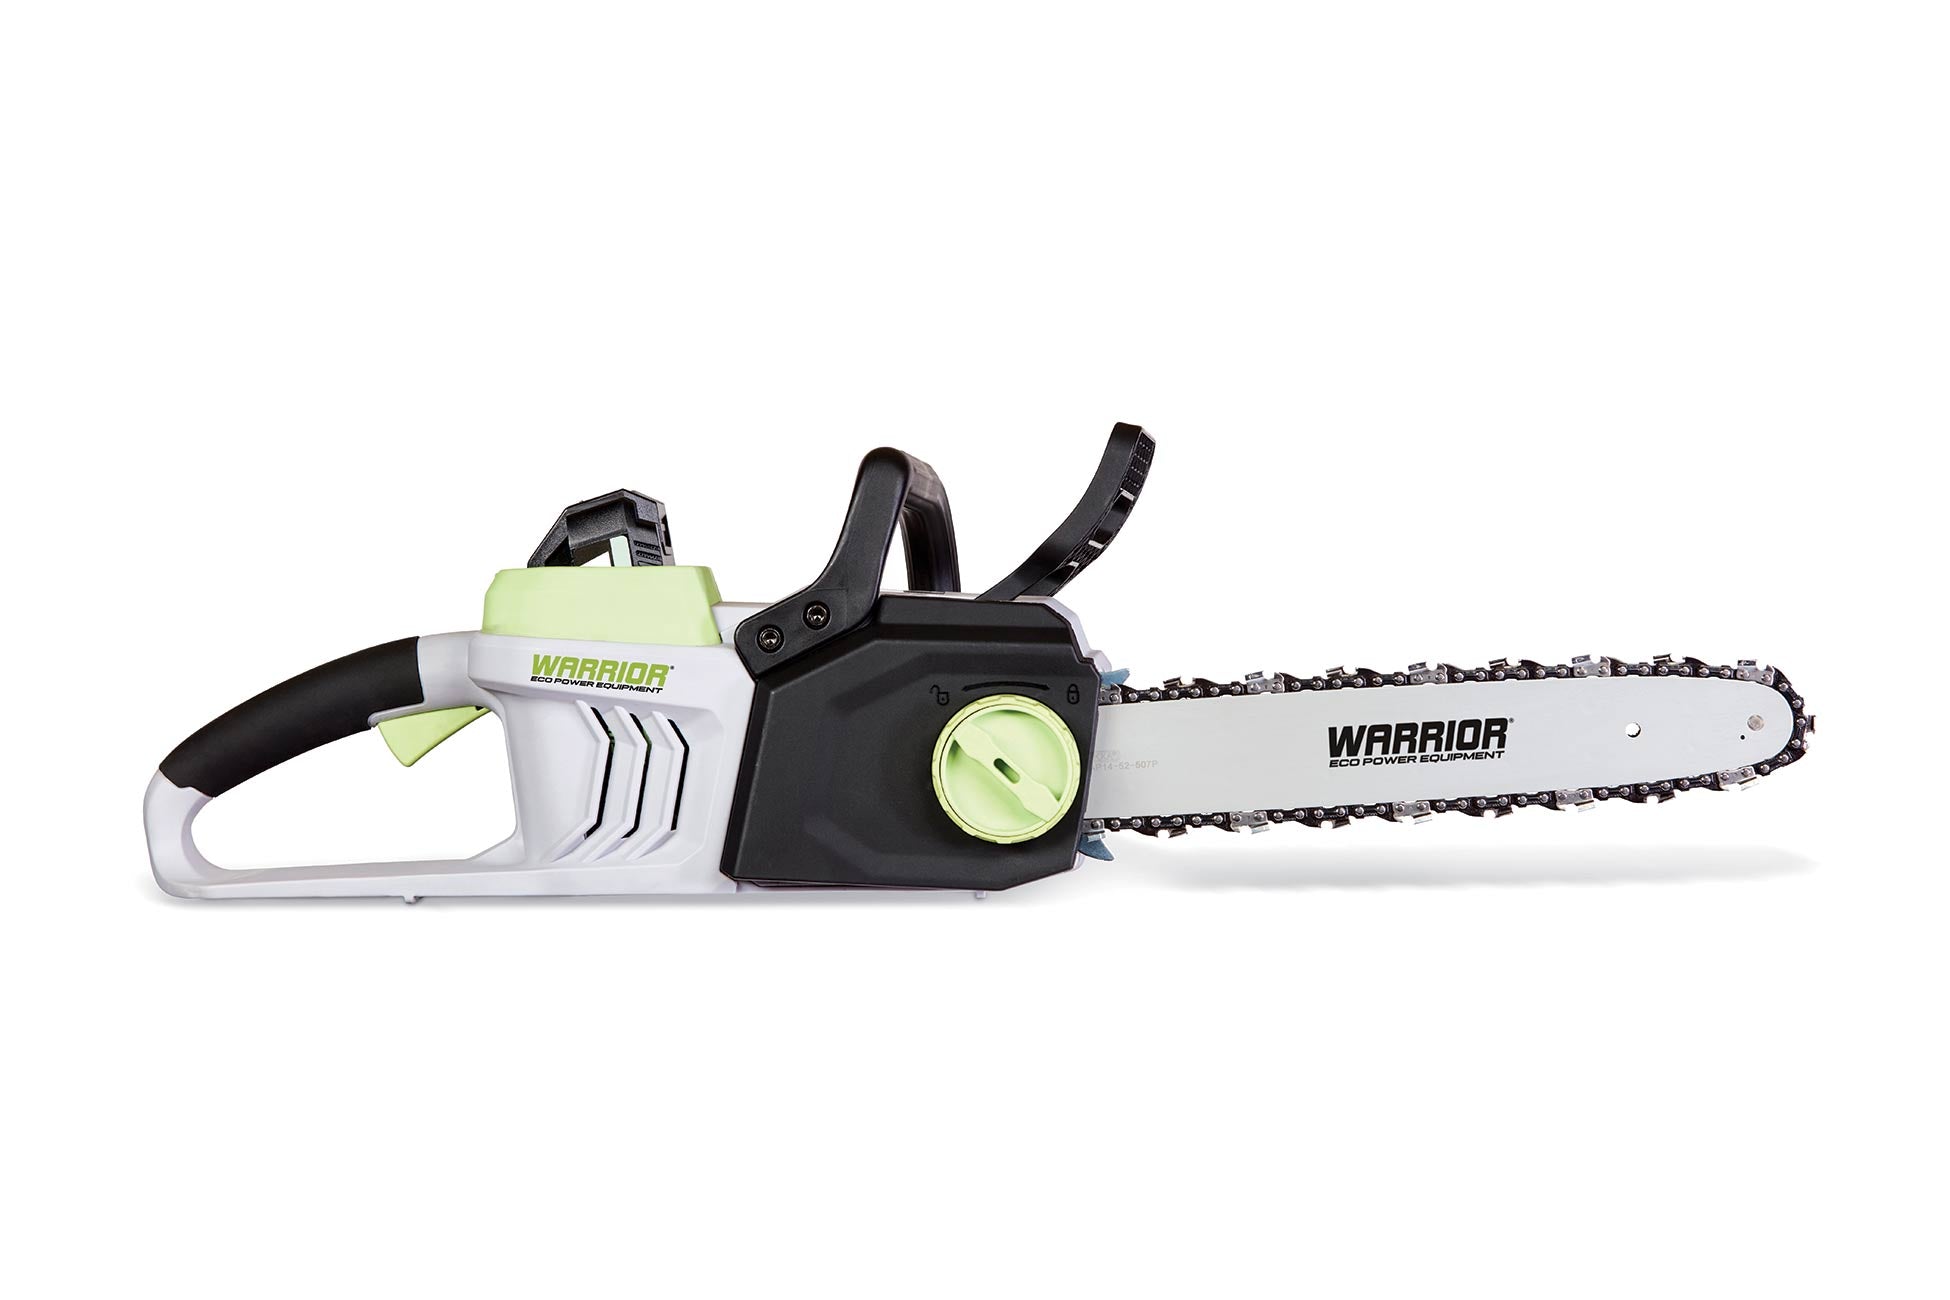 Side view of Warrior Eco Power Equipment 40v Cordless Chainsaw